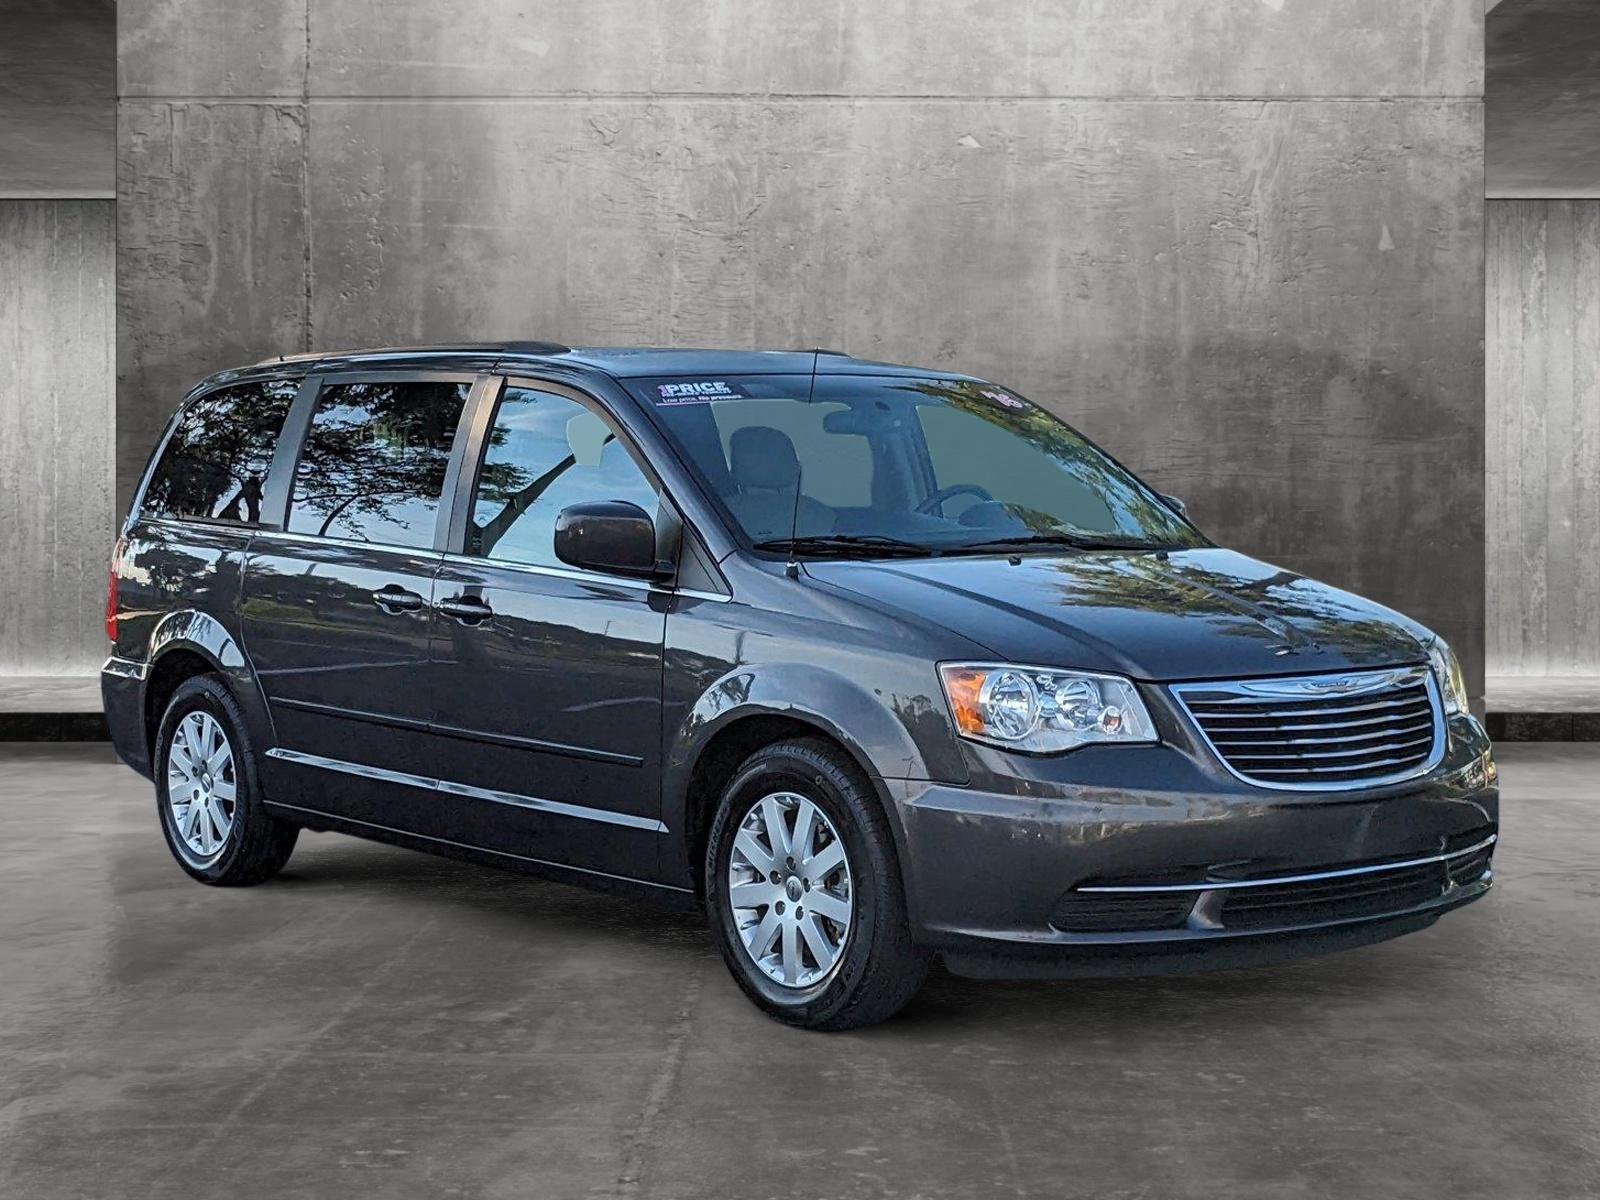 2016 Chrysler Town & Country Vehicle Photo in Sanford, FL 32771